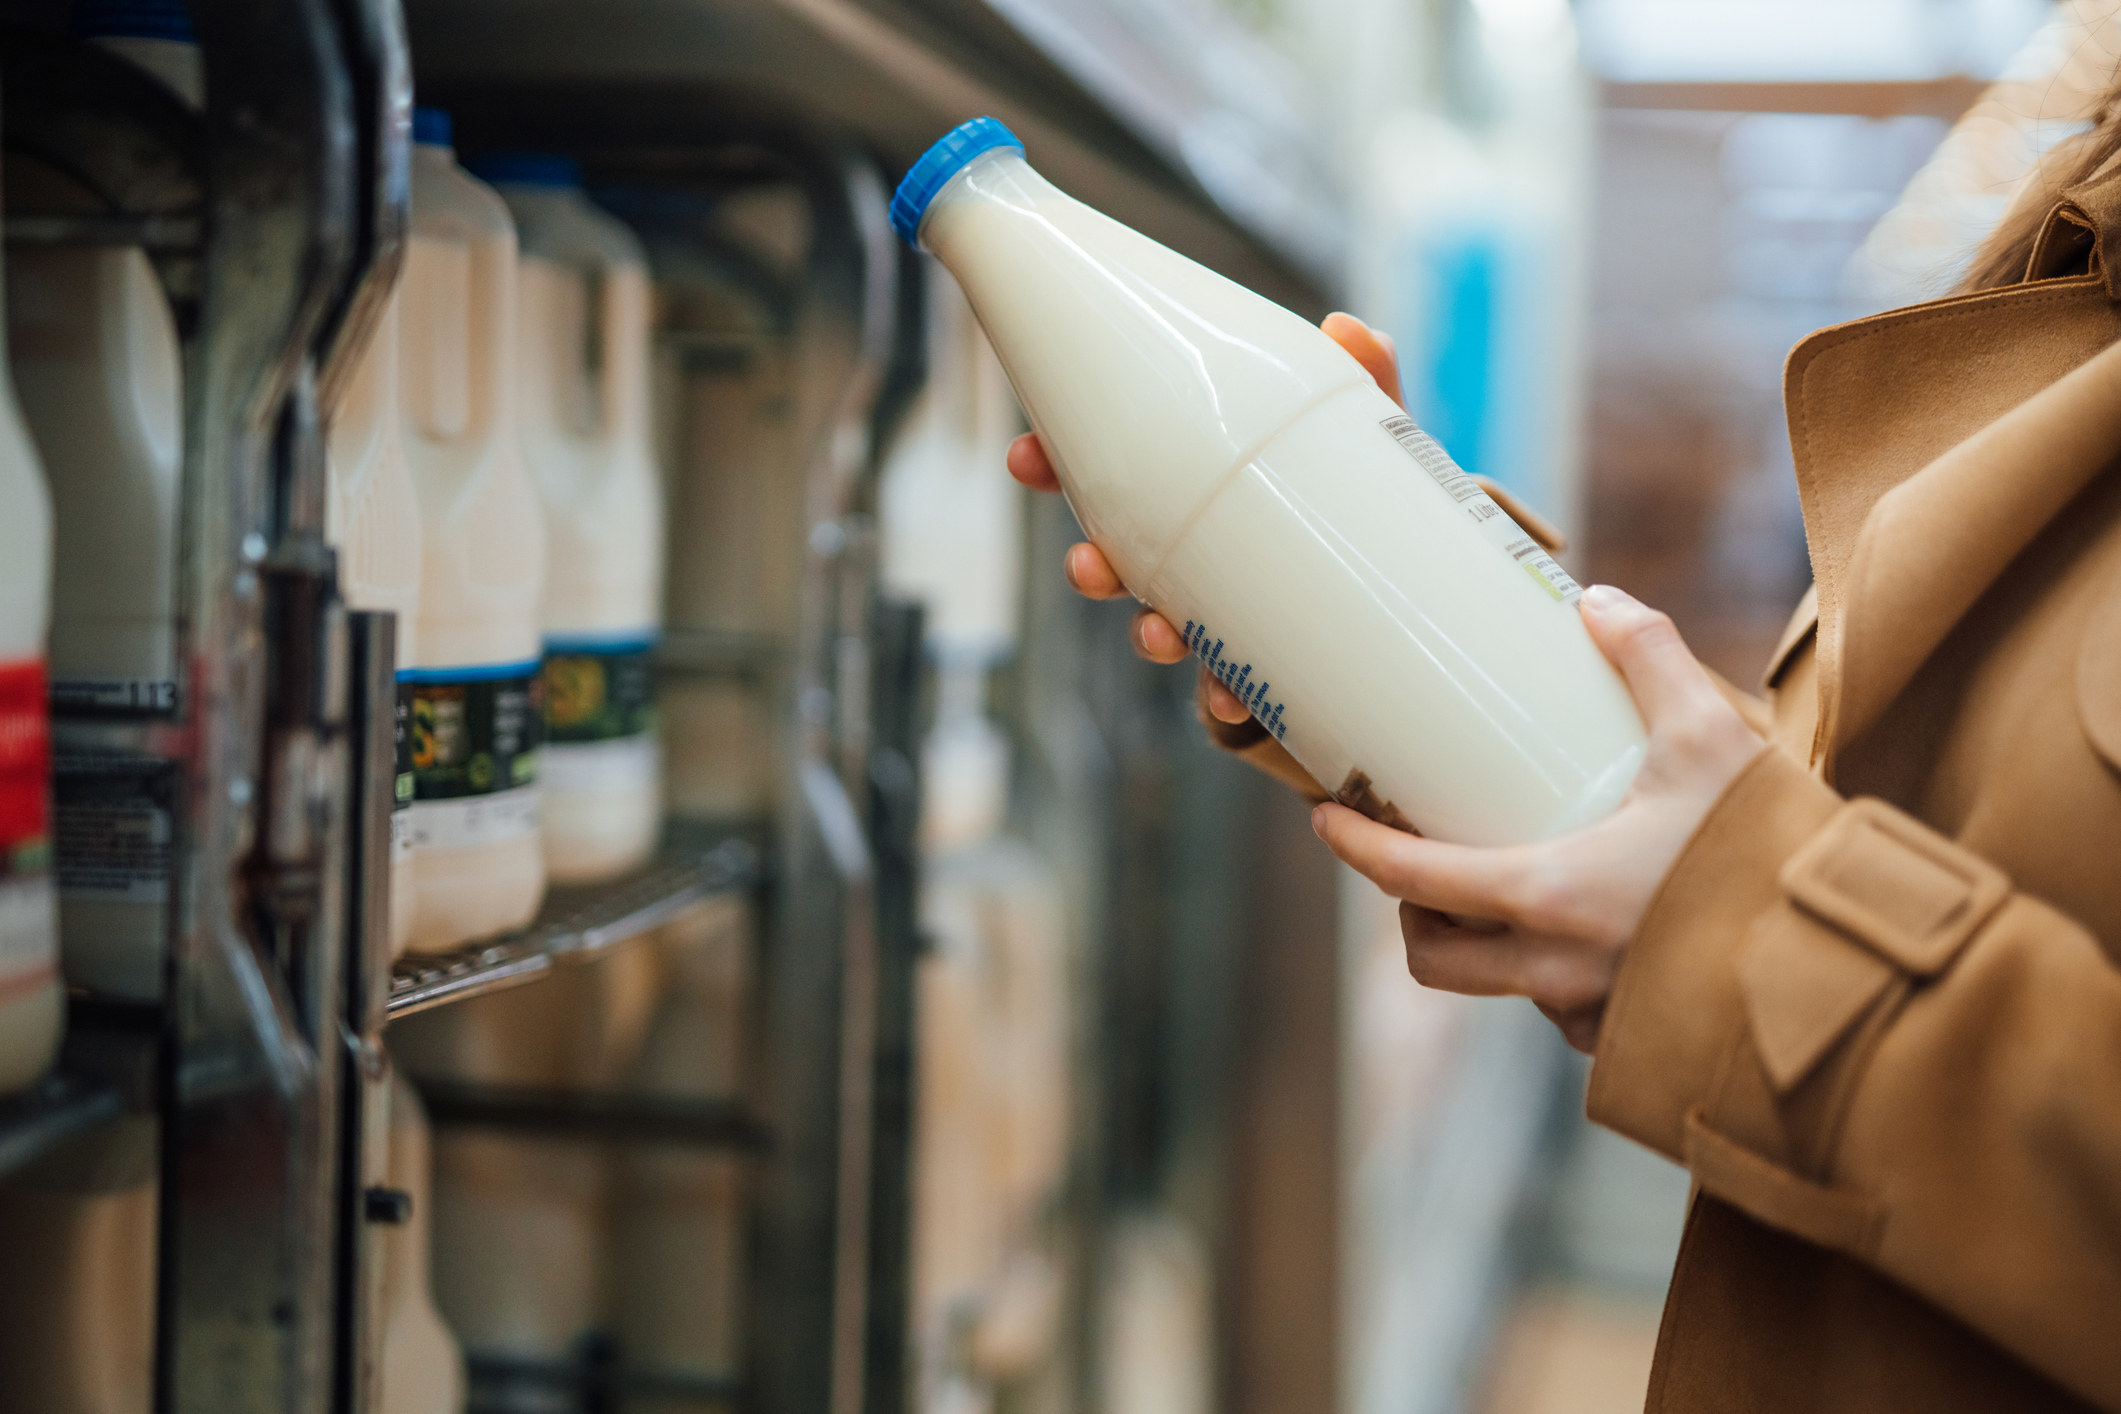 A shopper picks up milk at the grocery store